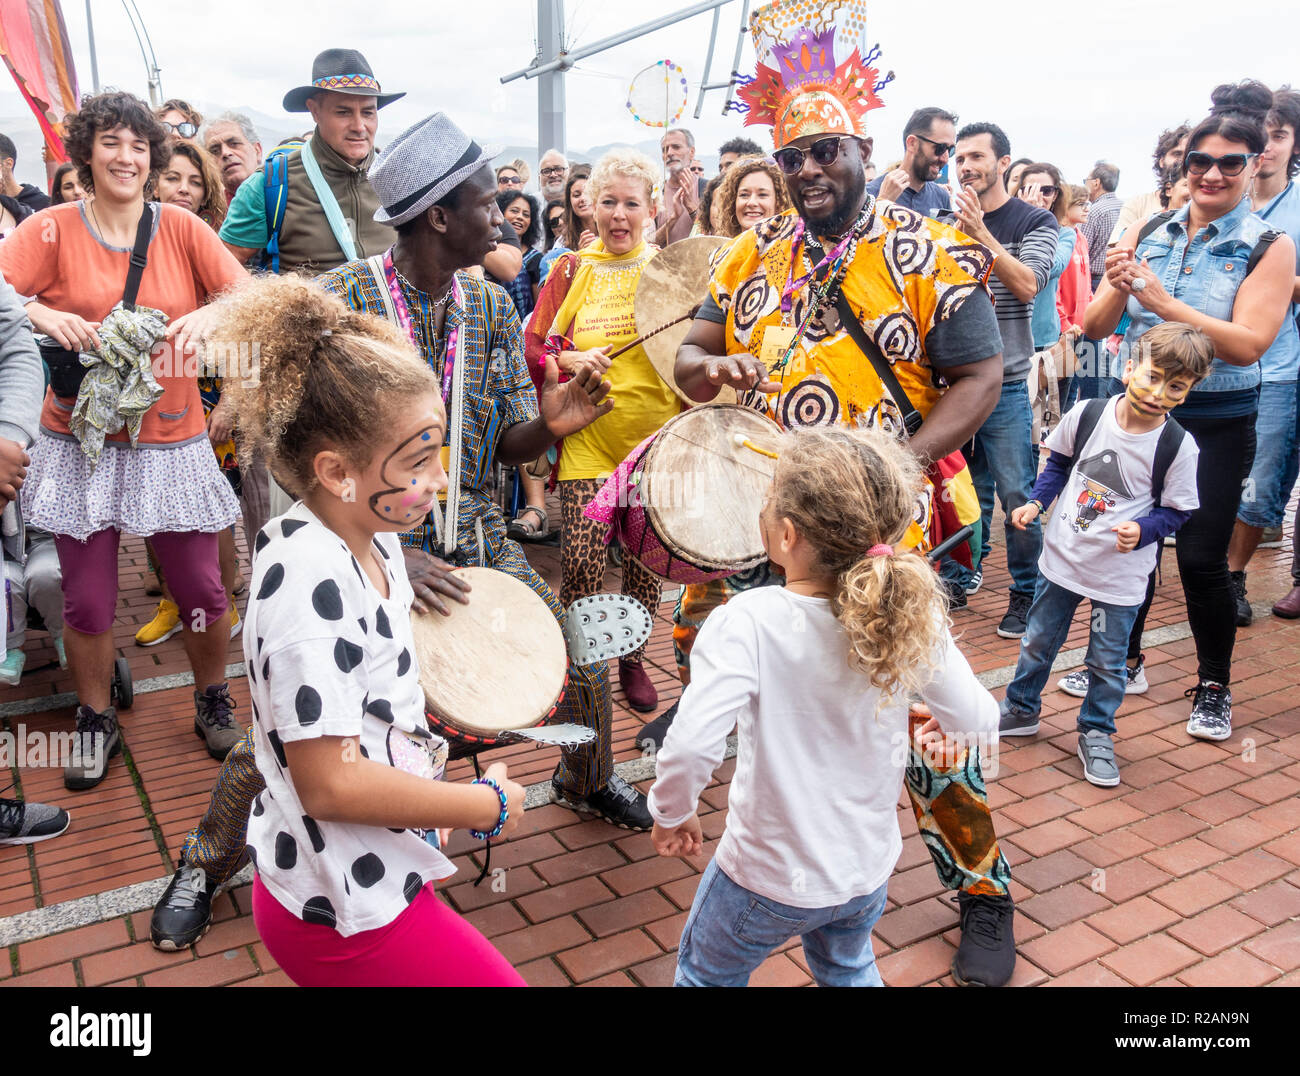 Las Palmas, Gran Canaria, Canary Islands, Spain. 18th November 2018.  Impromptu dancing at the WOMAD music festival closing procession in Las  Palmas. Former Genesis singer, Peter Gabriel, is one of the founders